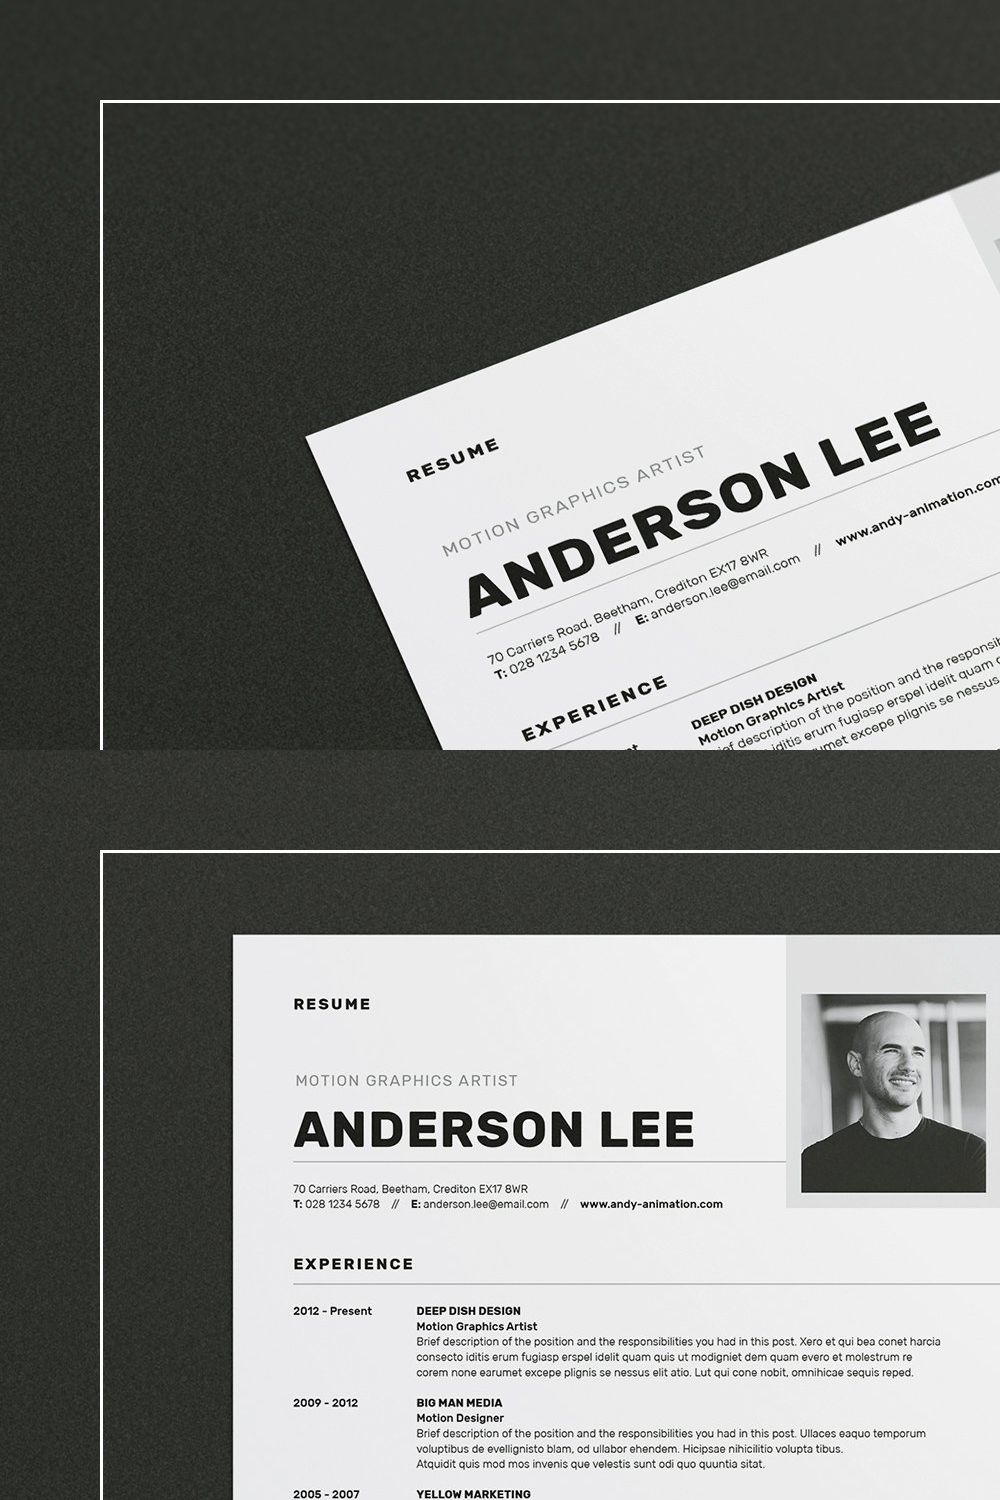 Resume/CV - Anderson pinterest preview image.